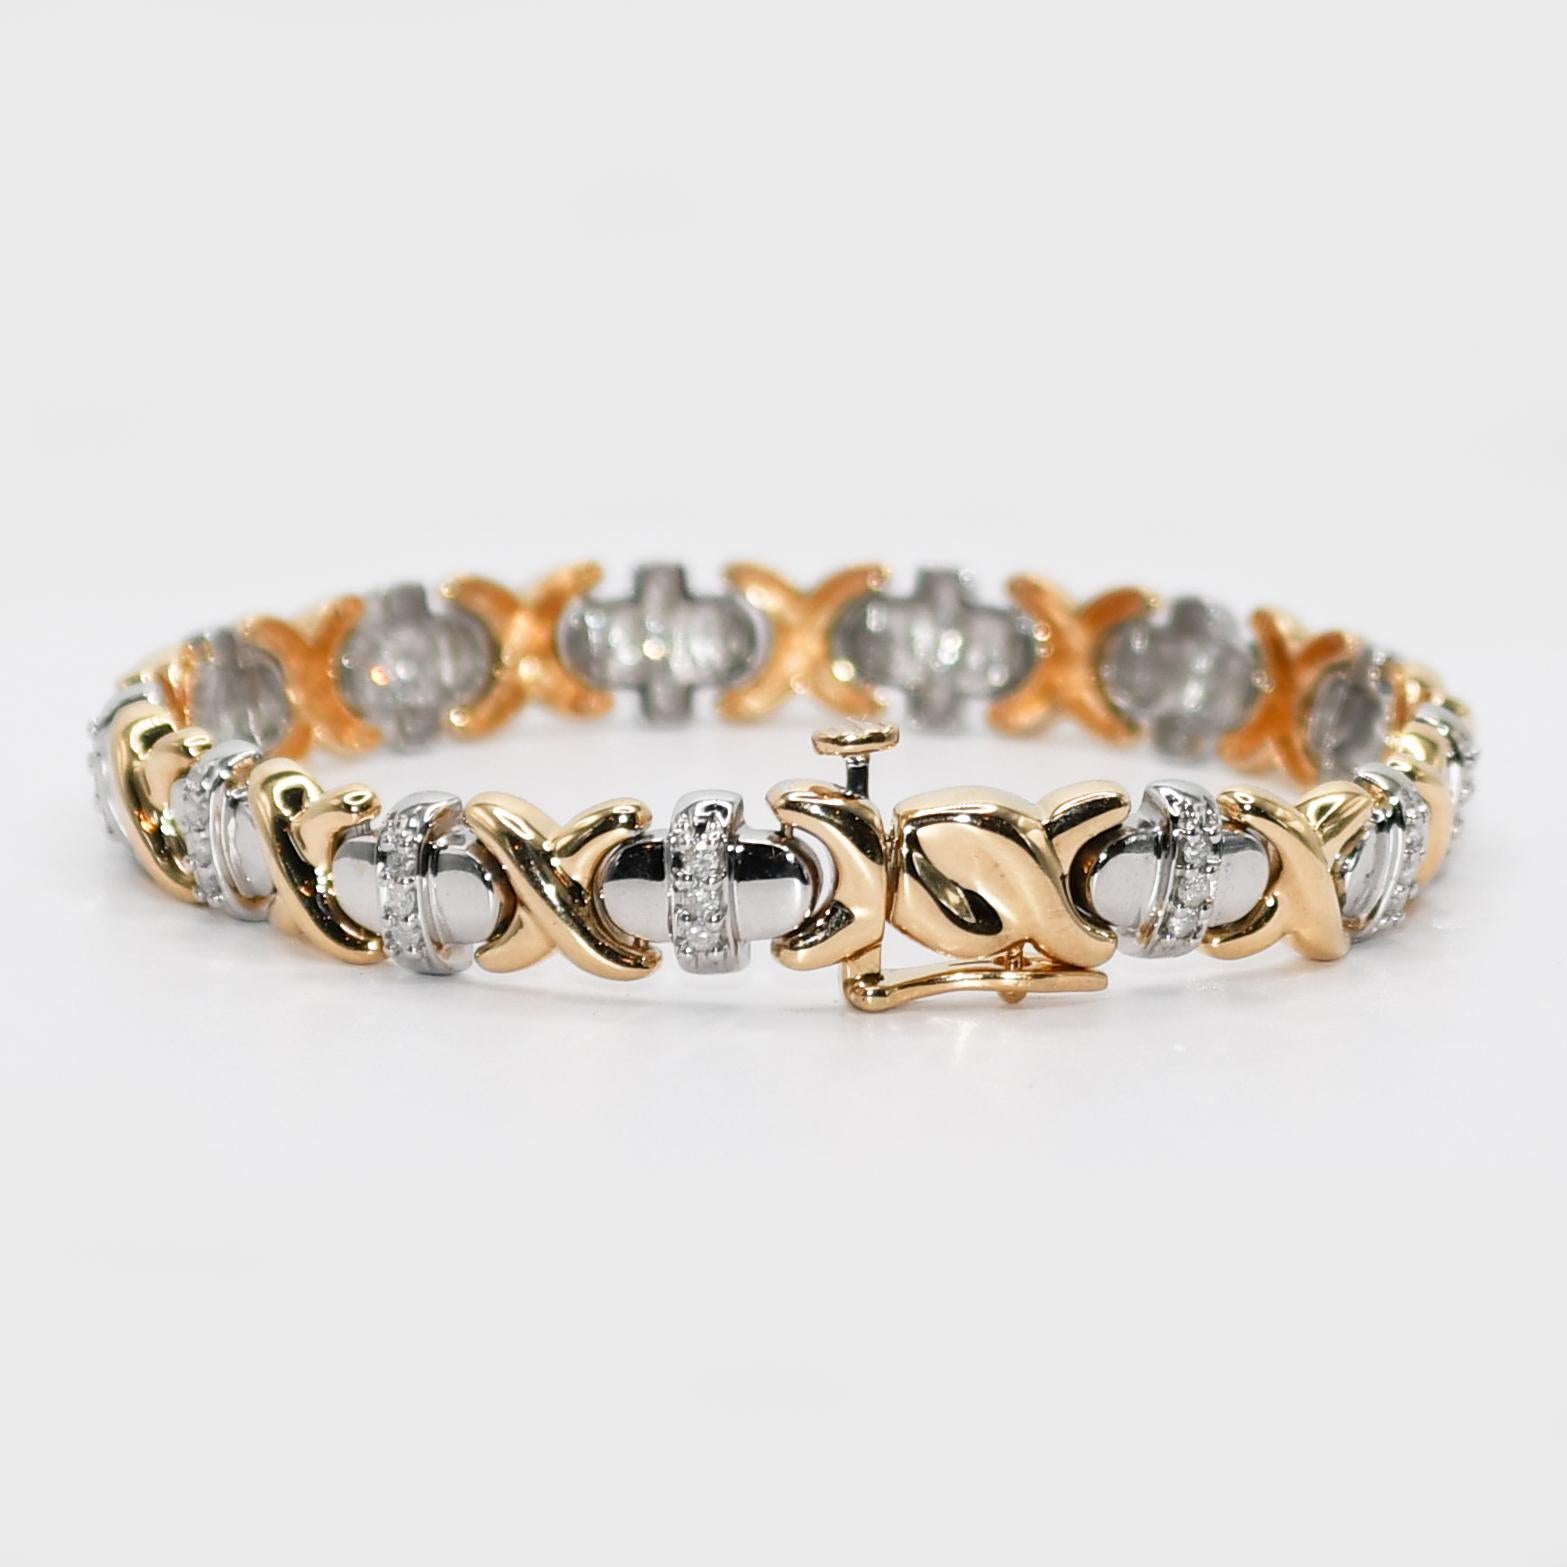 10K Yellow Gold 2 Tone Diamond Bracelet, 1.00tdw., 18.4g In Excellent Condition For Sale In Laguna Beach, CA